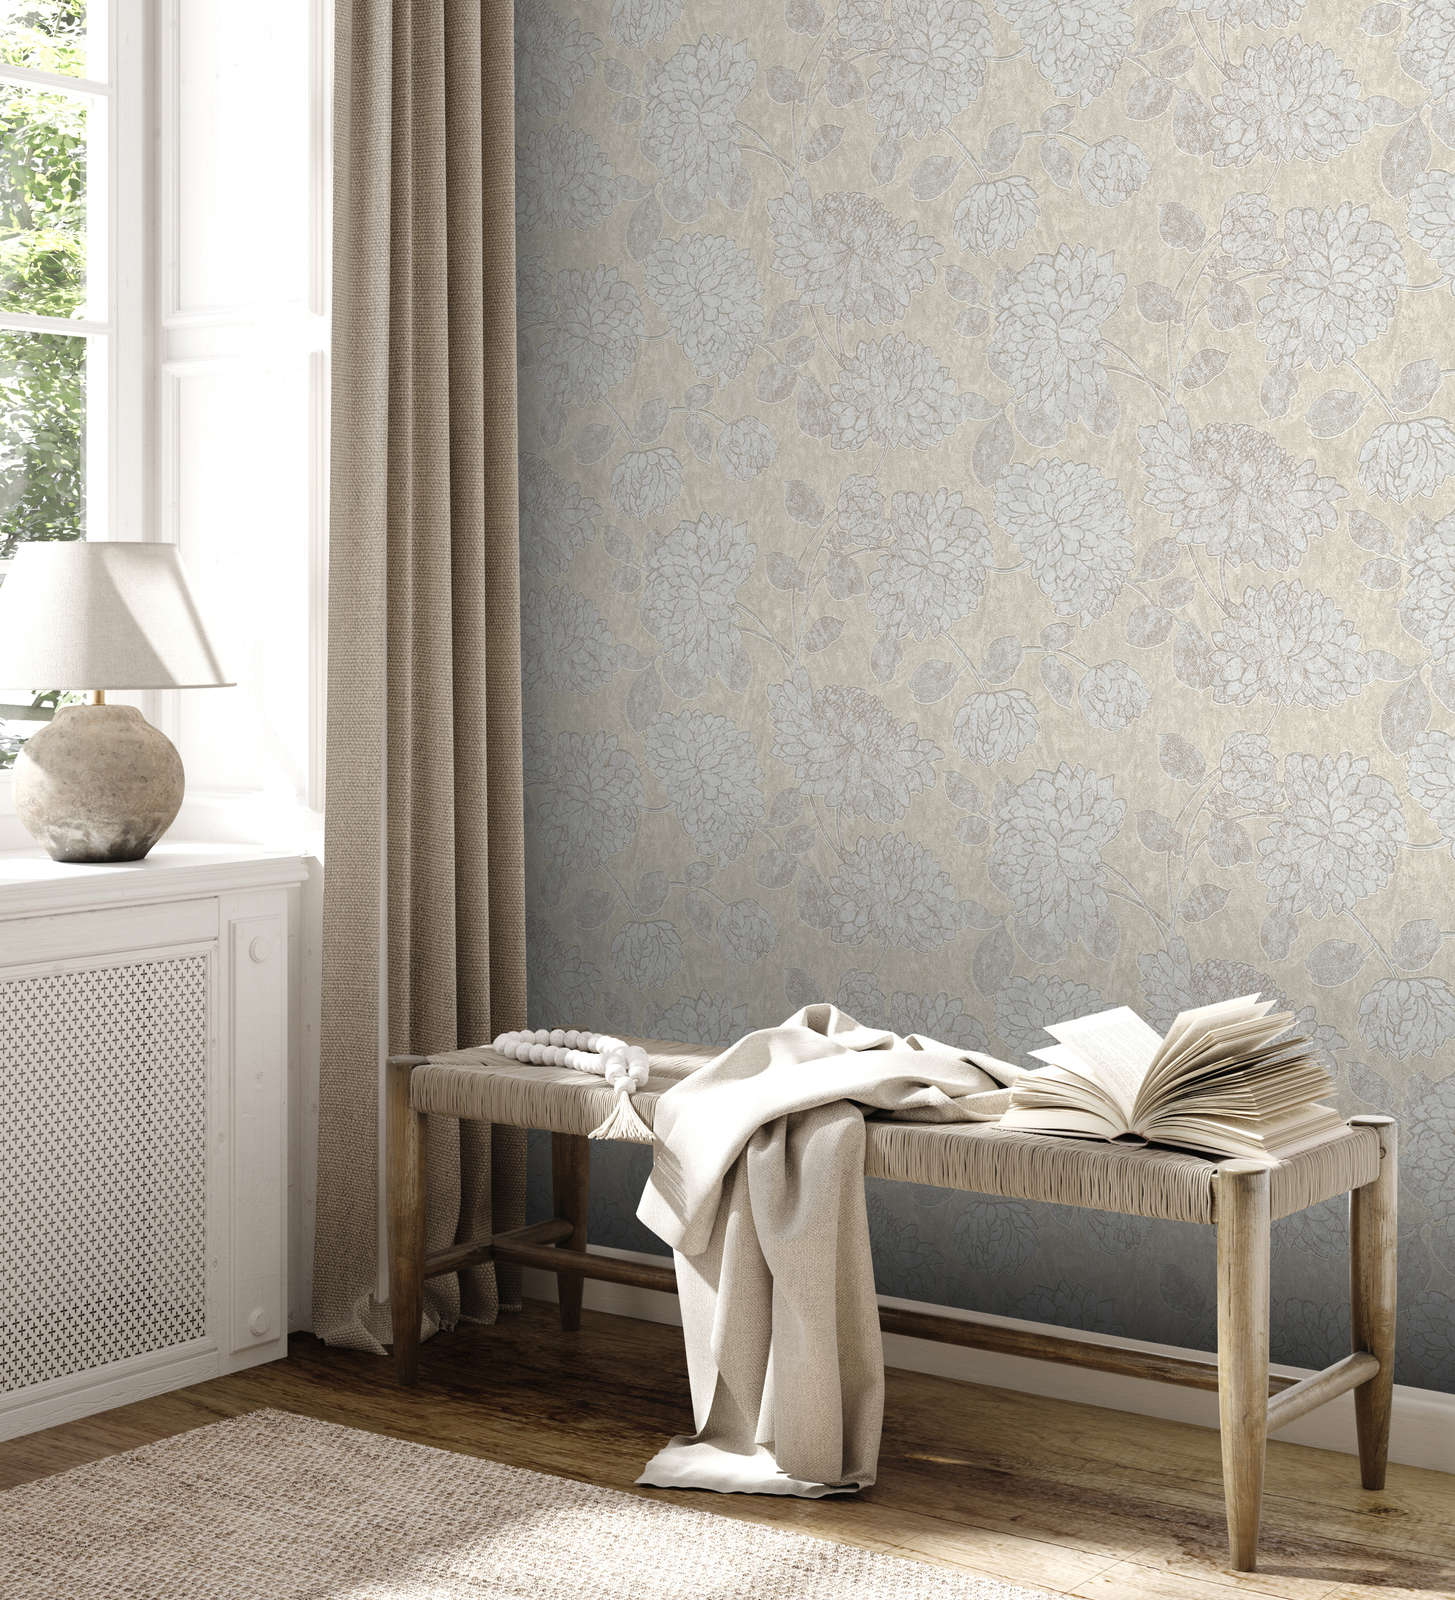             Floral pattern wallpaper with a slight sheen - beige, white
        